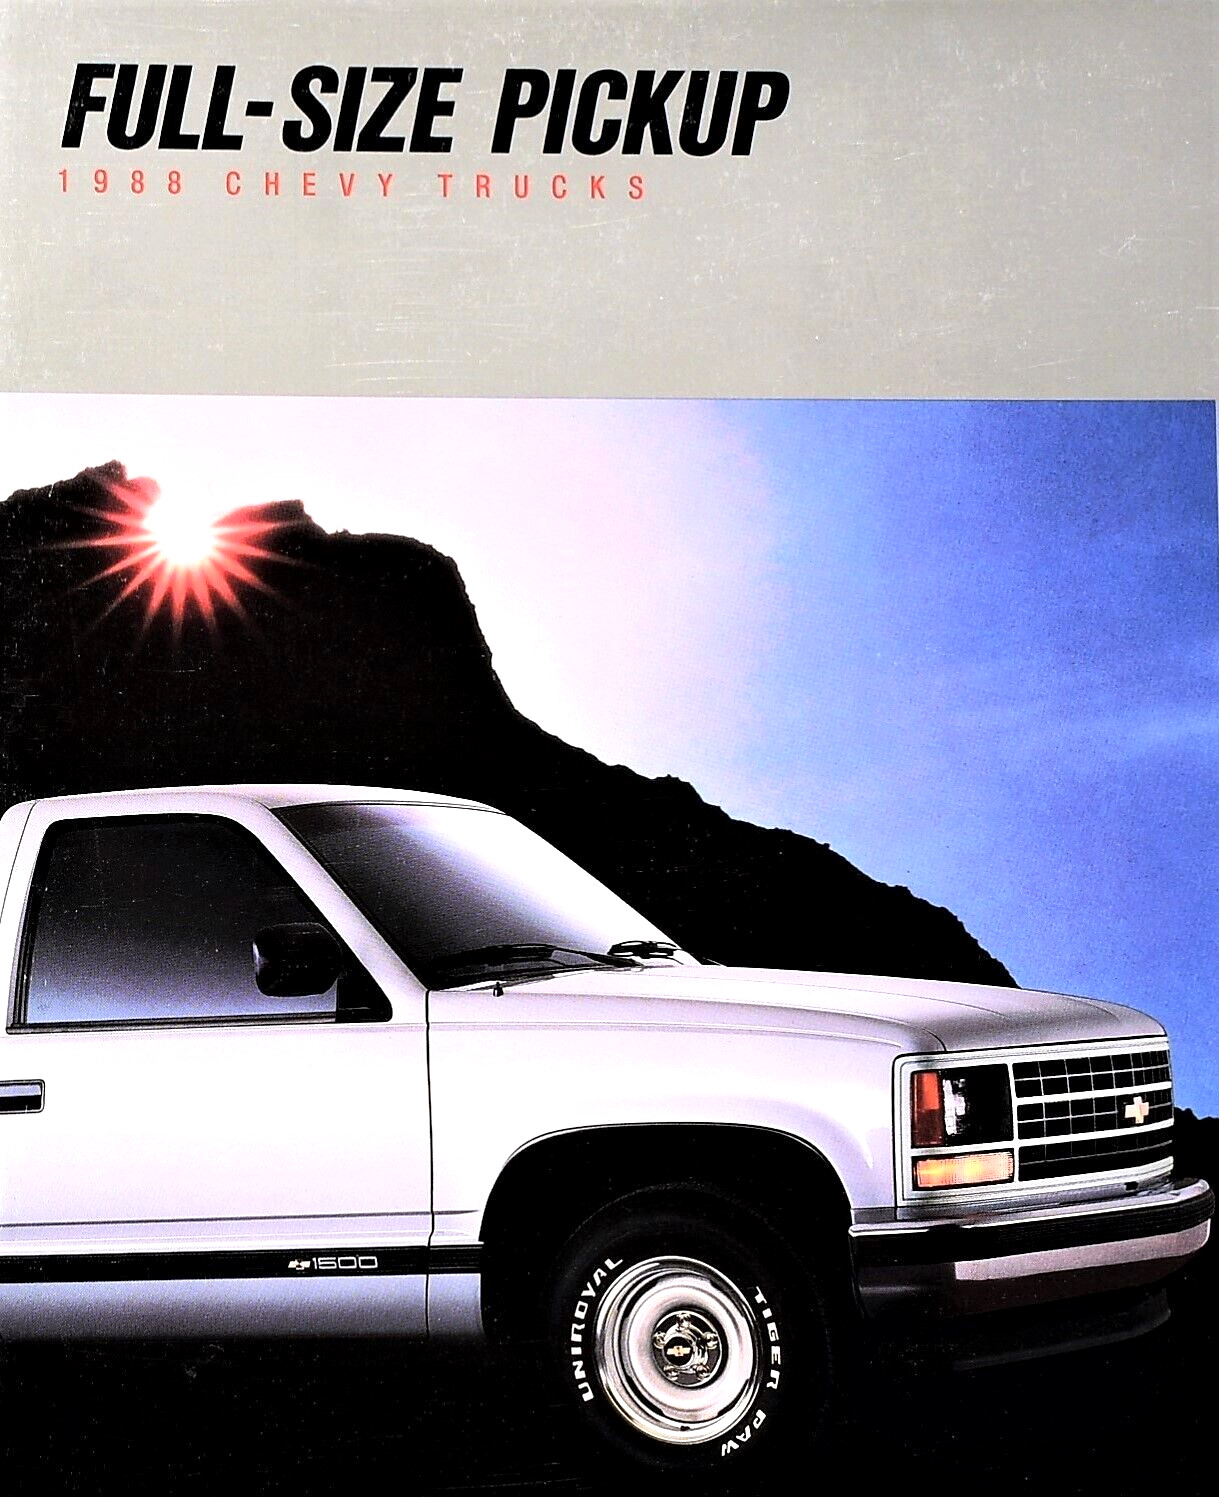 1988 CHEVROLET FULL SIZE PICKUP SALES BROCHURE CATALOG ~ 38 PAGES